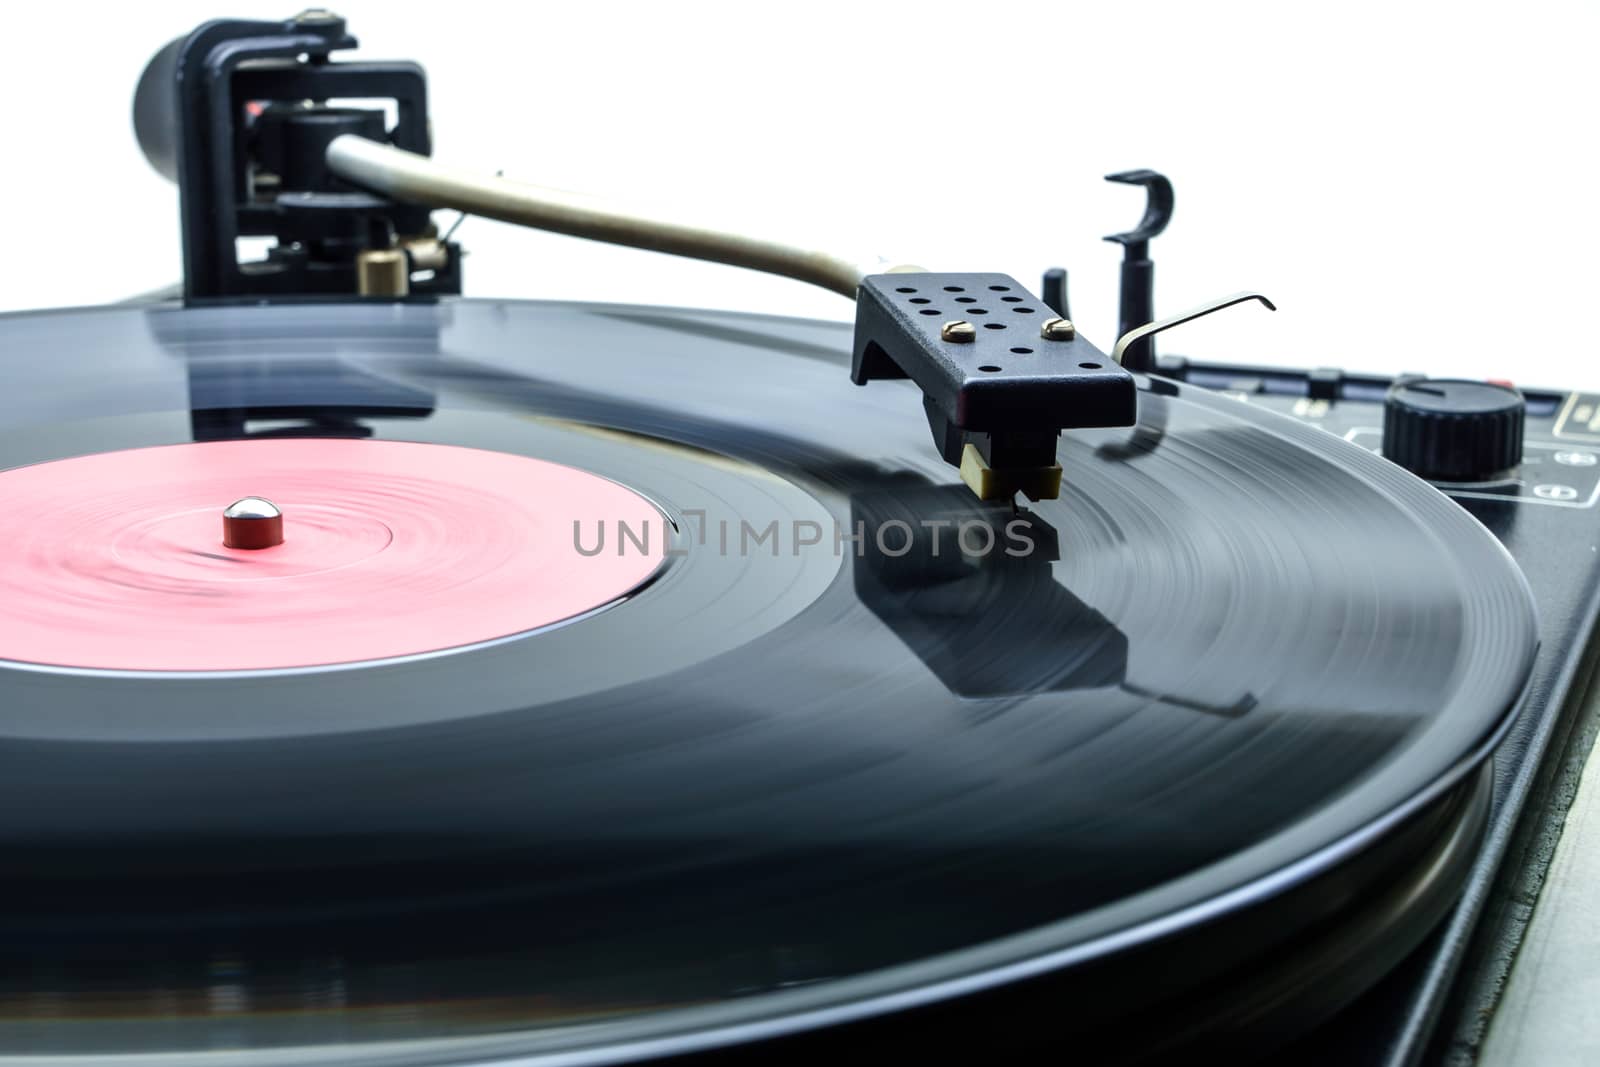 Retro party dj turntable to play music on vinyl audio disc.Hifi audiophile turn table device. by prostophotos